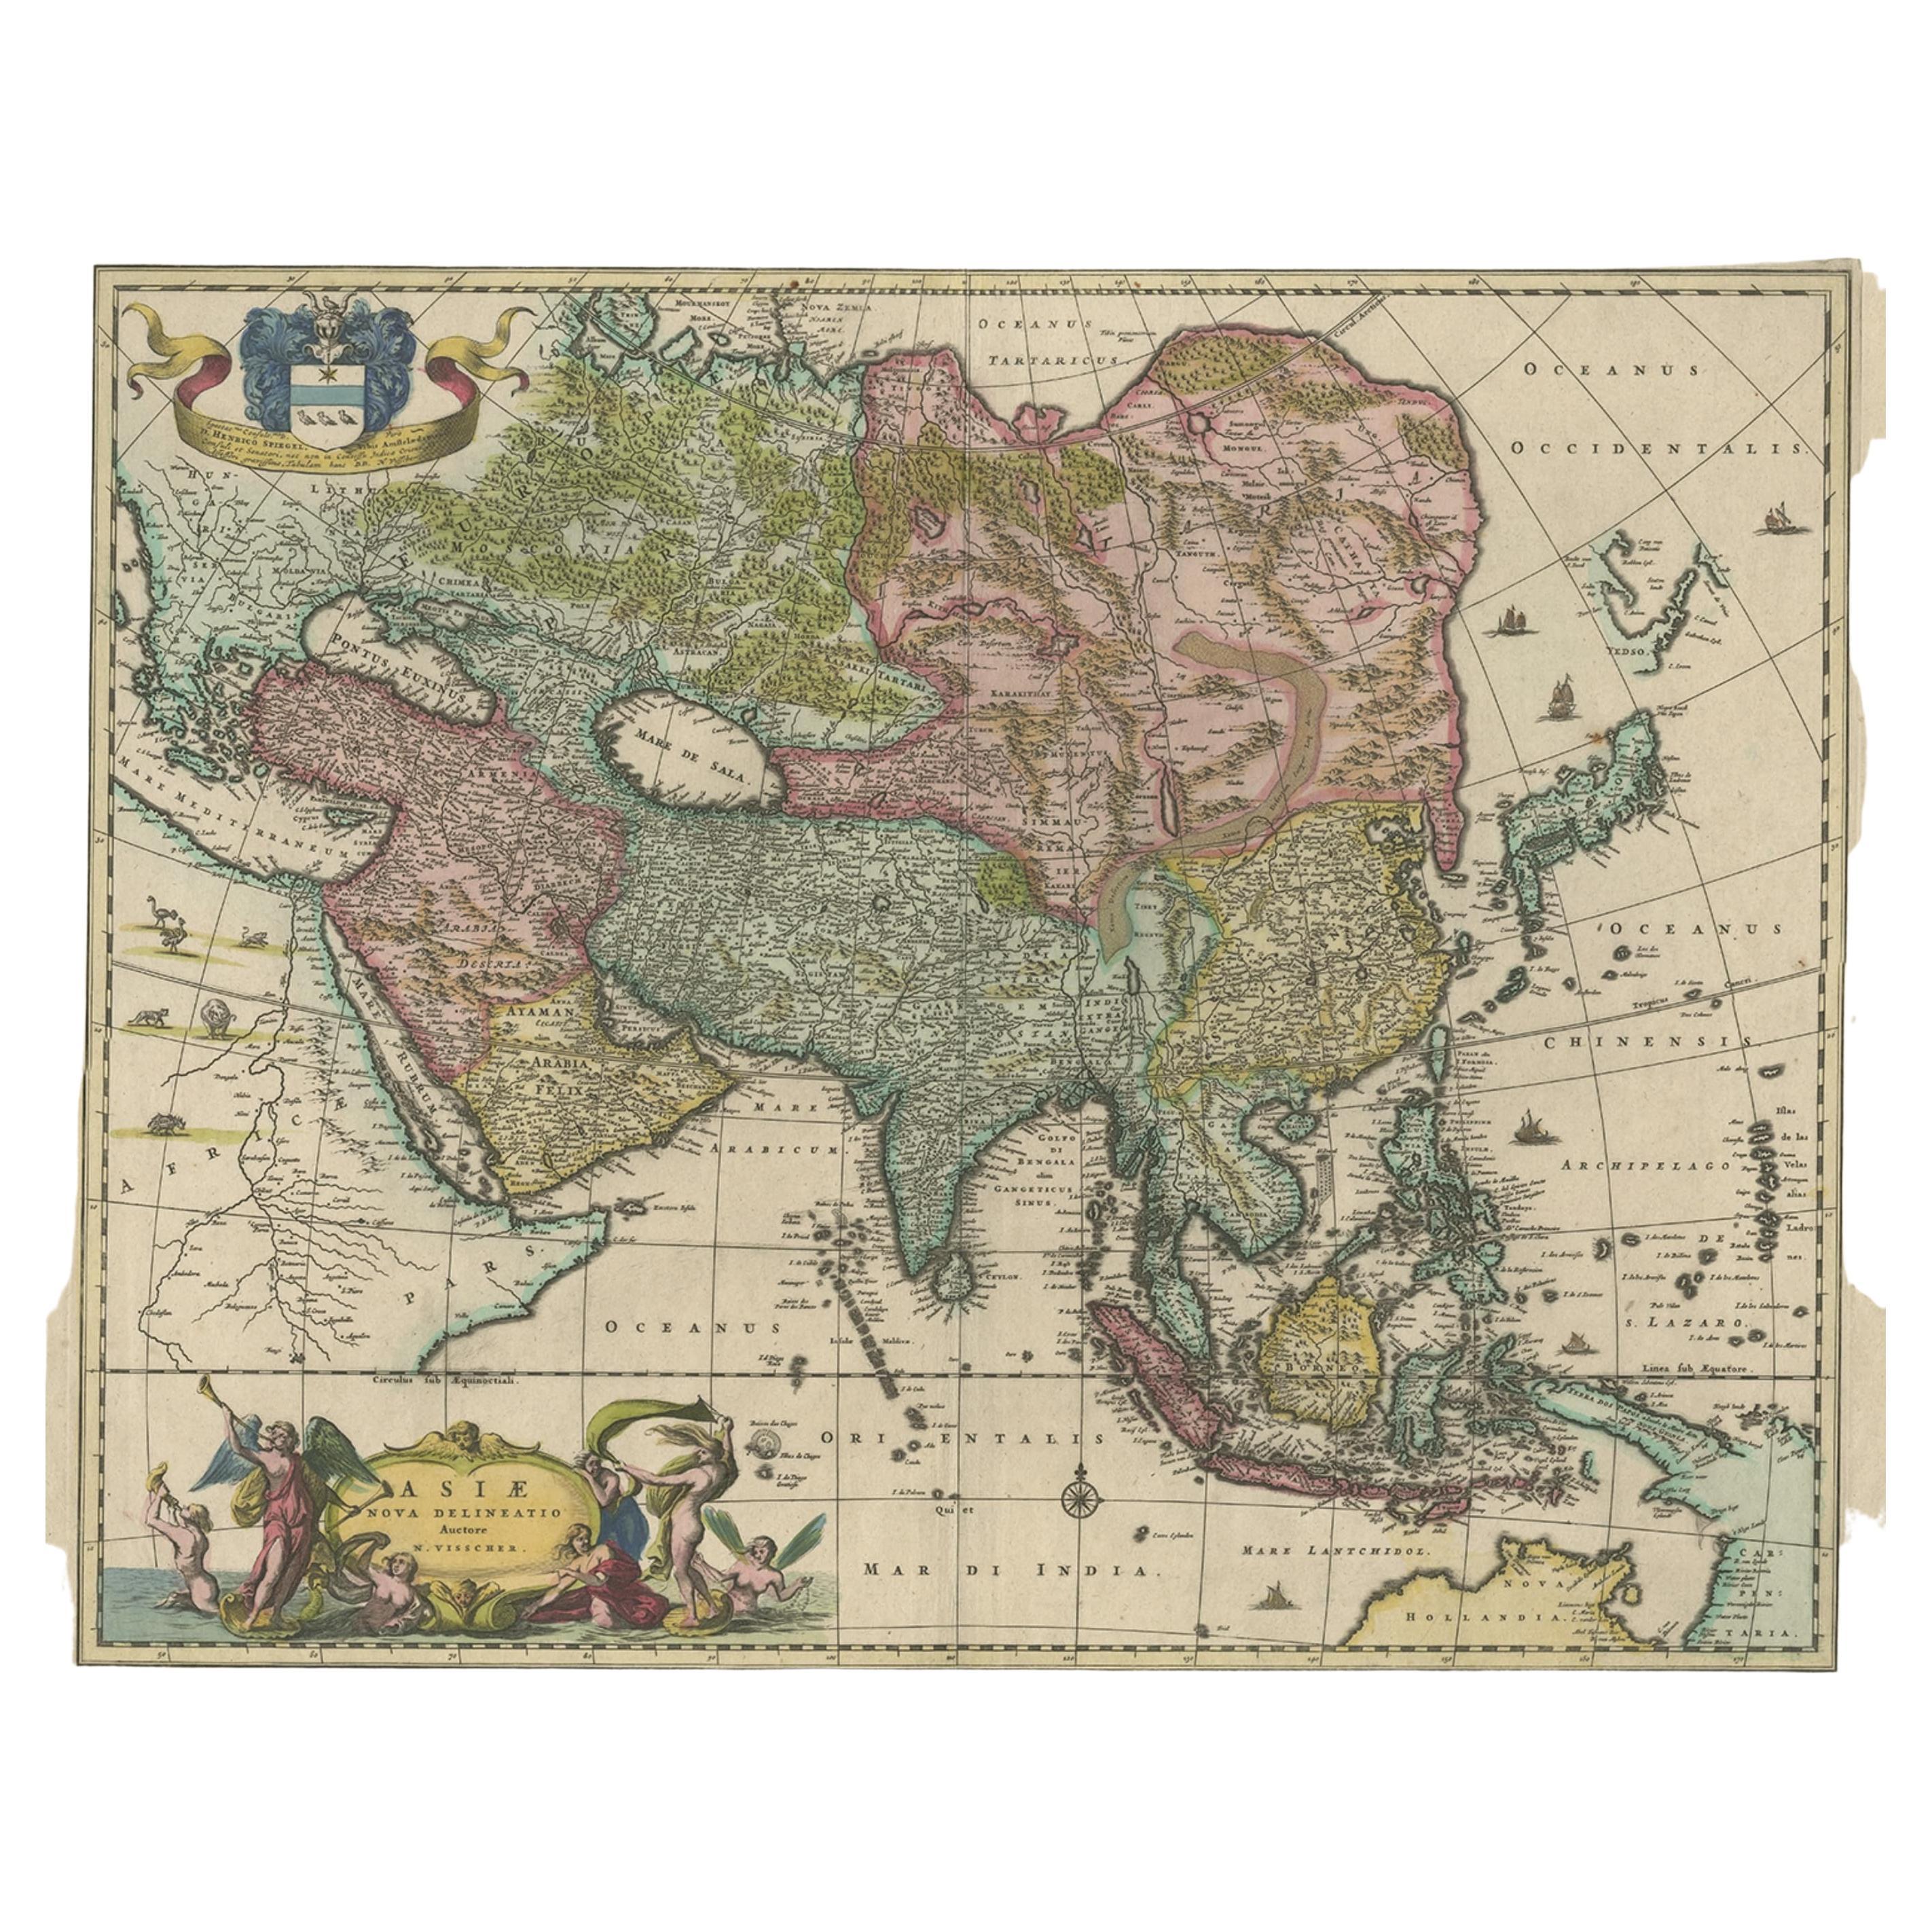 Antique map titled 'Asiae nova delineatio'. Decorative map of Asia and the East Indies. The map shows Korea as a peninsula. In China the Great Wall is depicted, as well as a long stretch of desert, identified as the Xamo. Australia and New Guinea